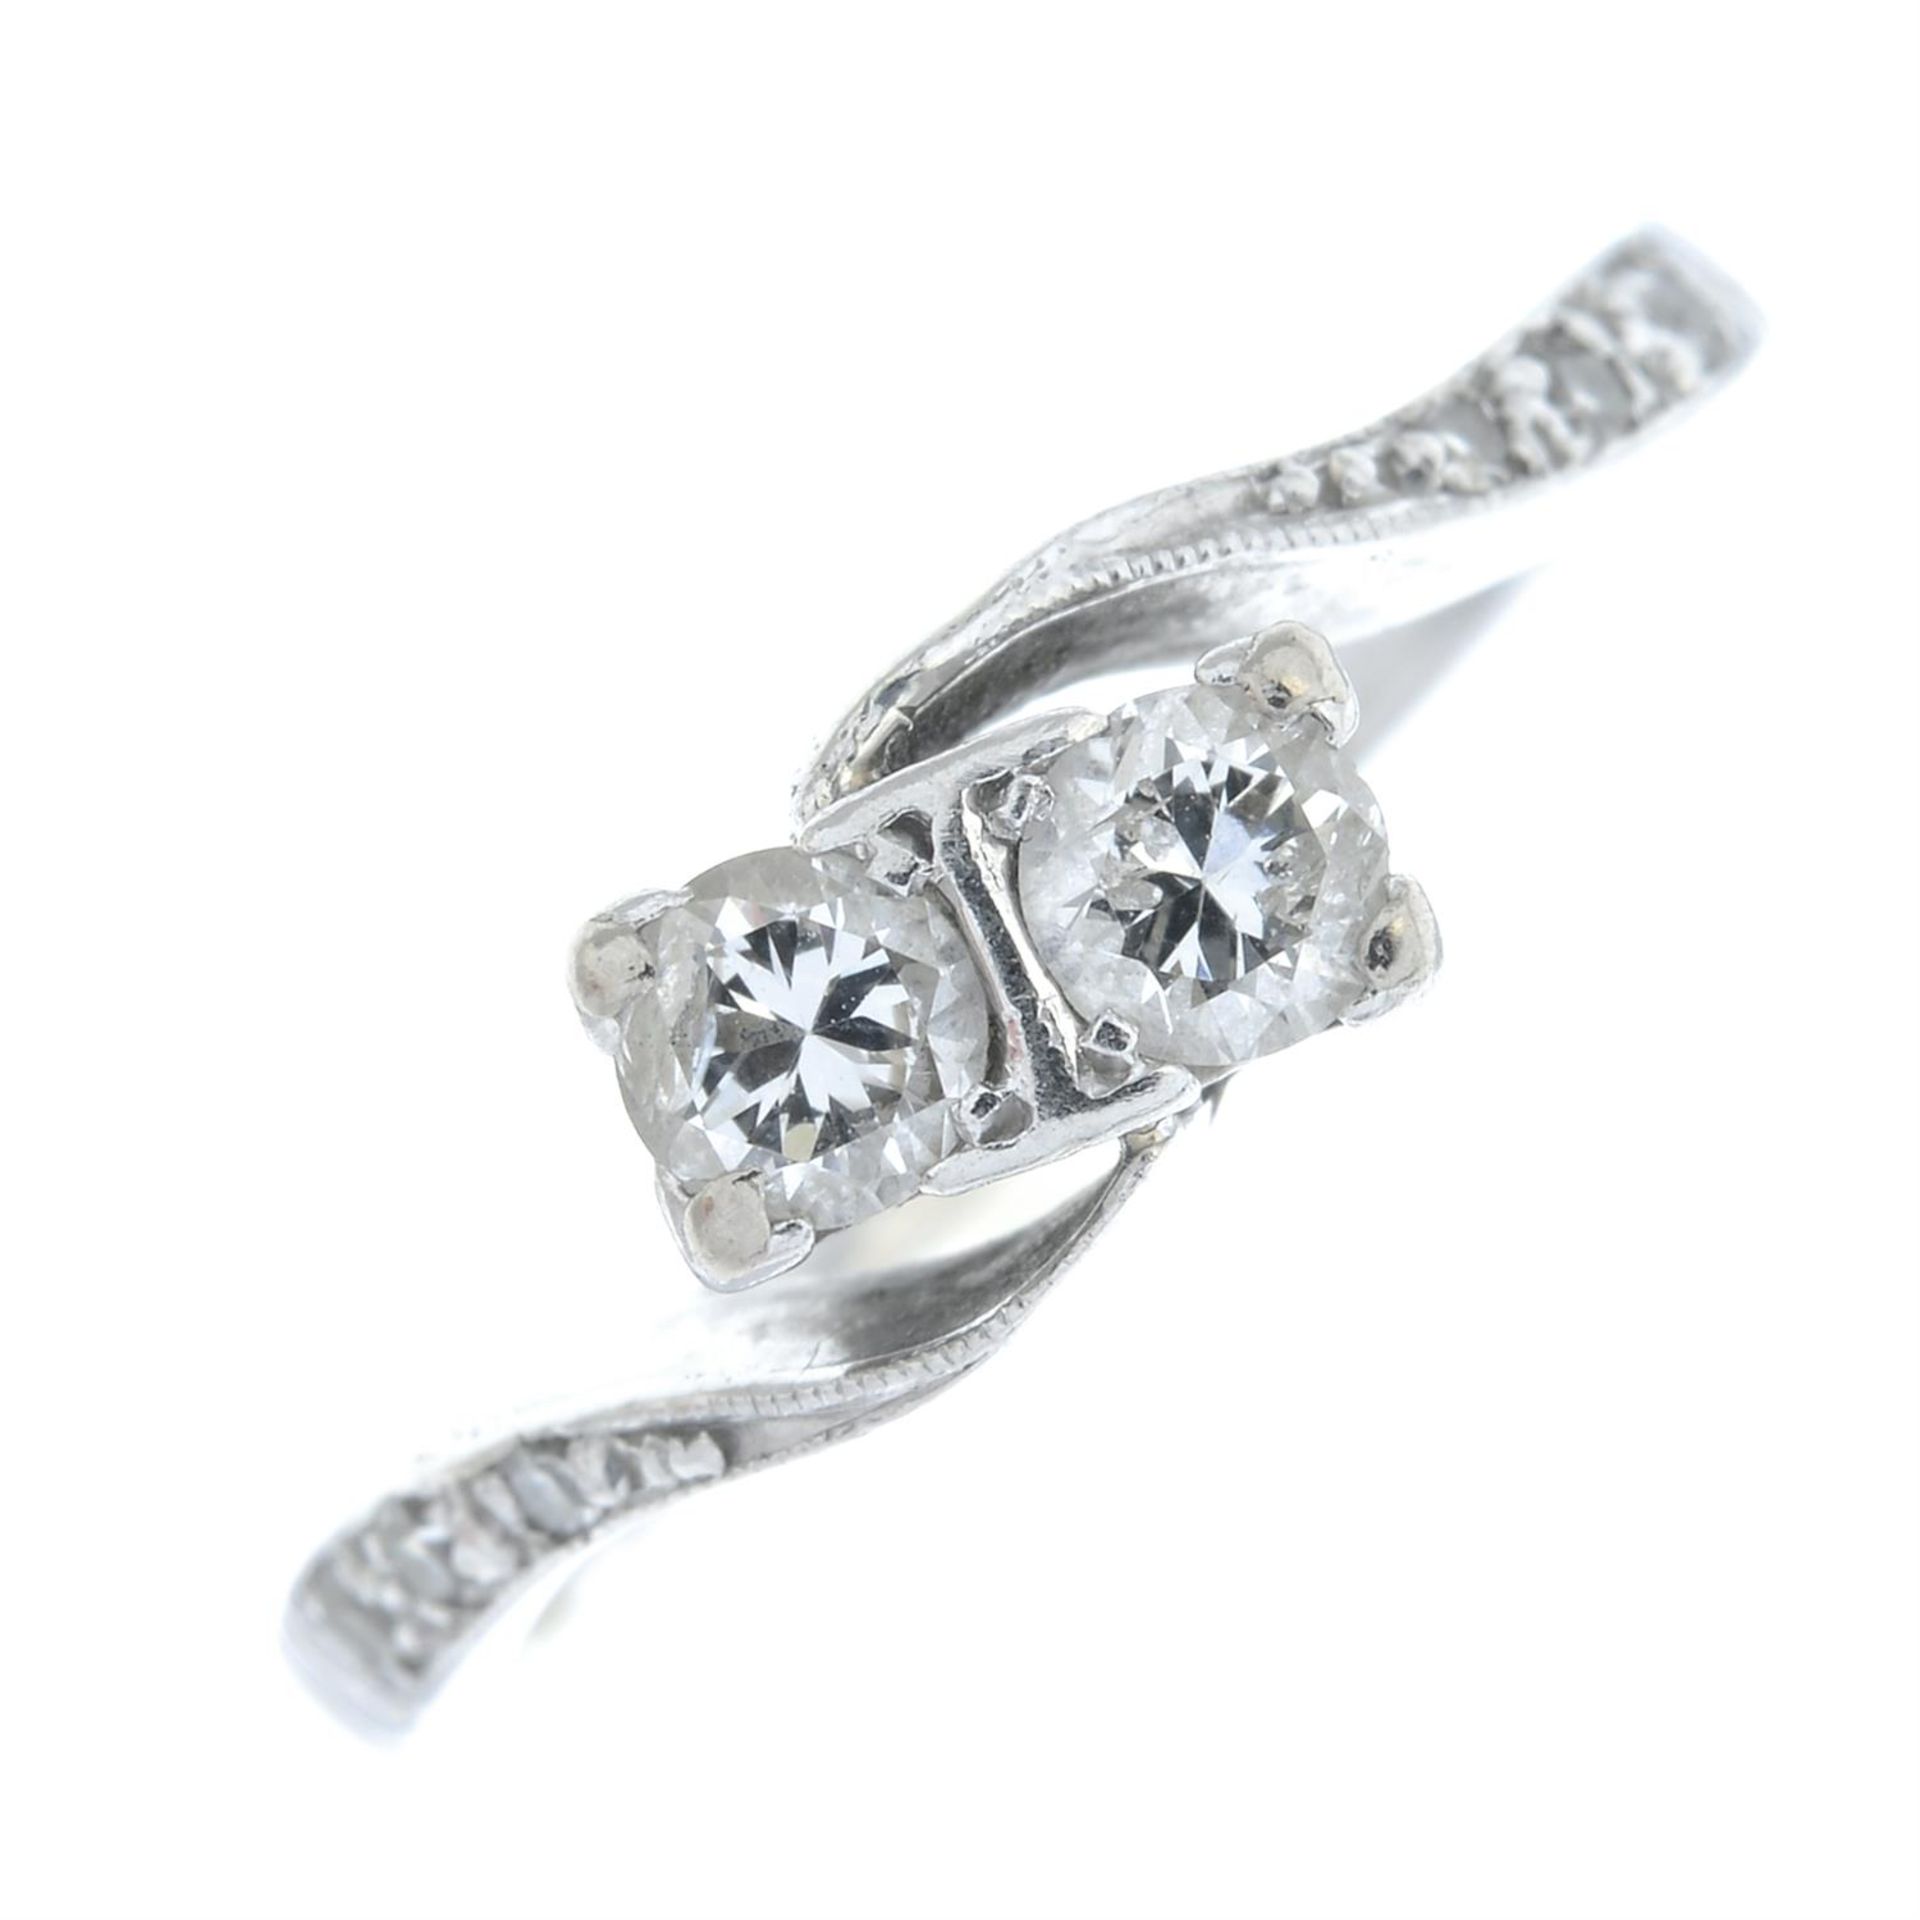 A brilliant-cut diamond crossover ring, with old-cut diamond shoulders.